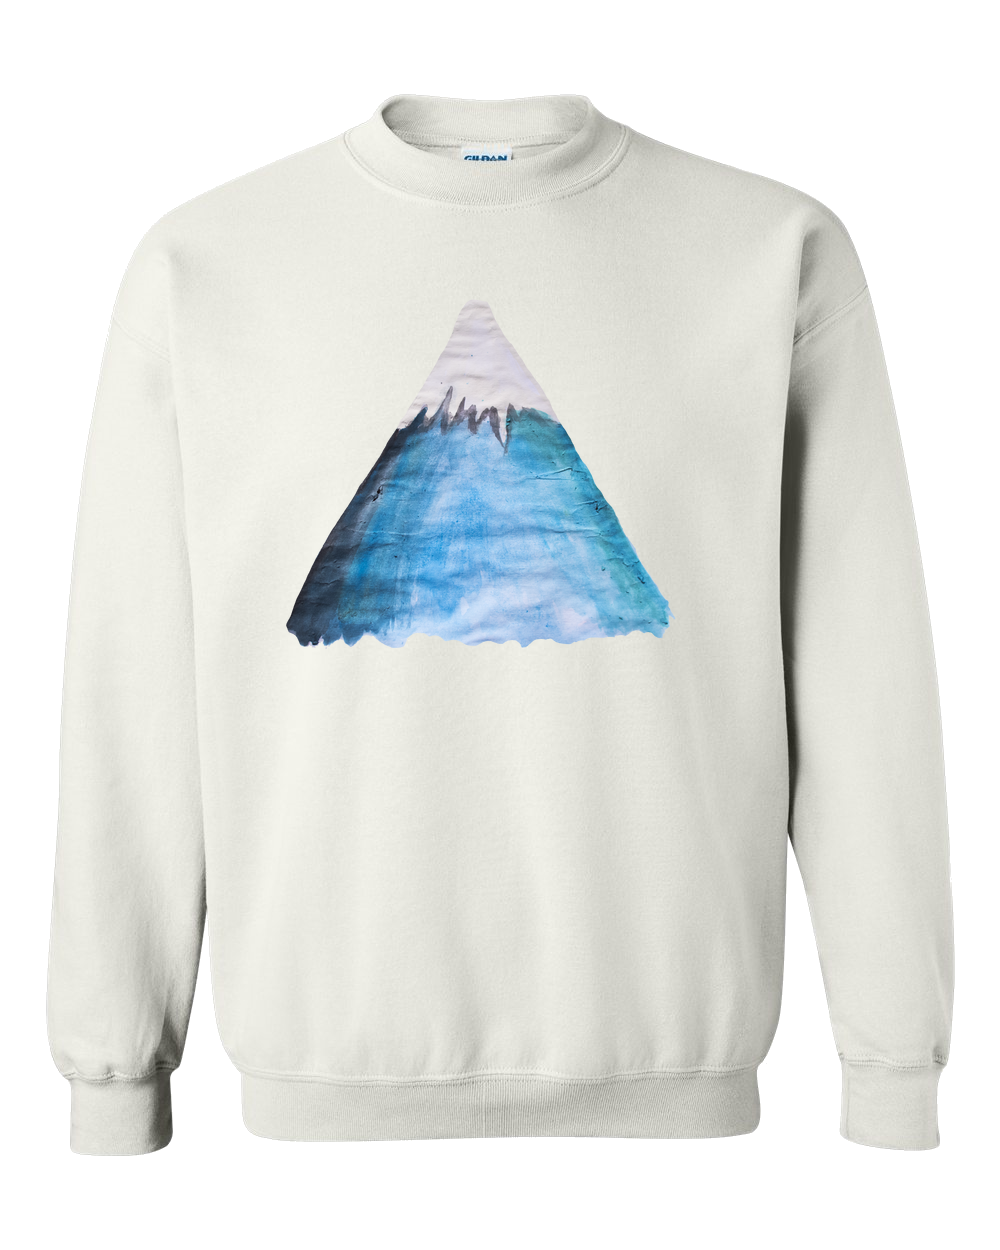 Snowy Mountain Water Color Adult Unisex  Crewneck Sweat Shirt